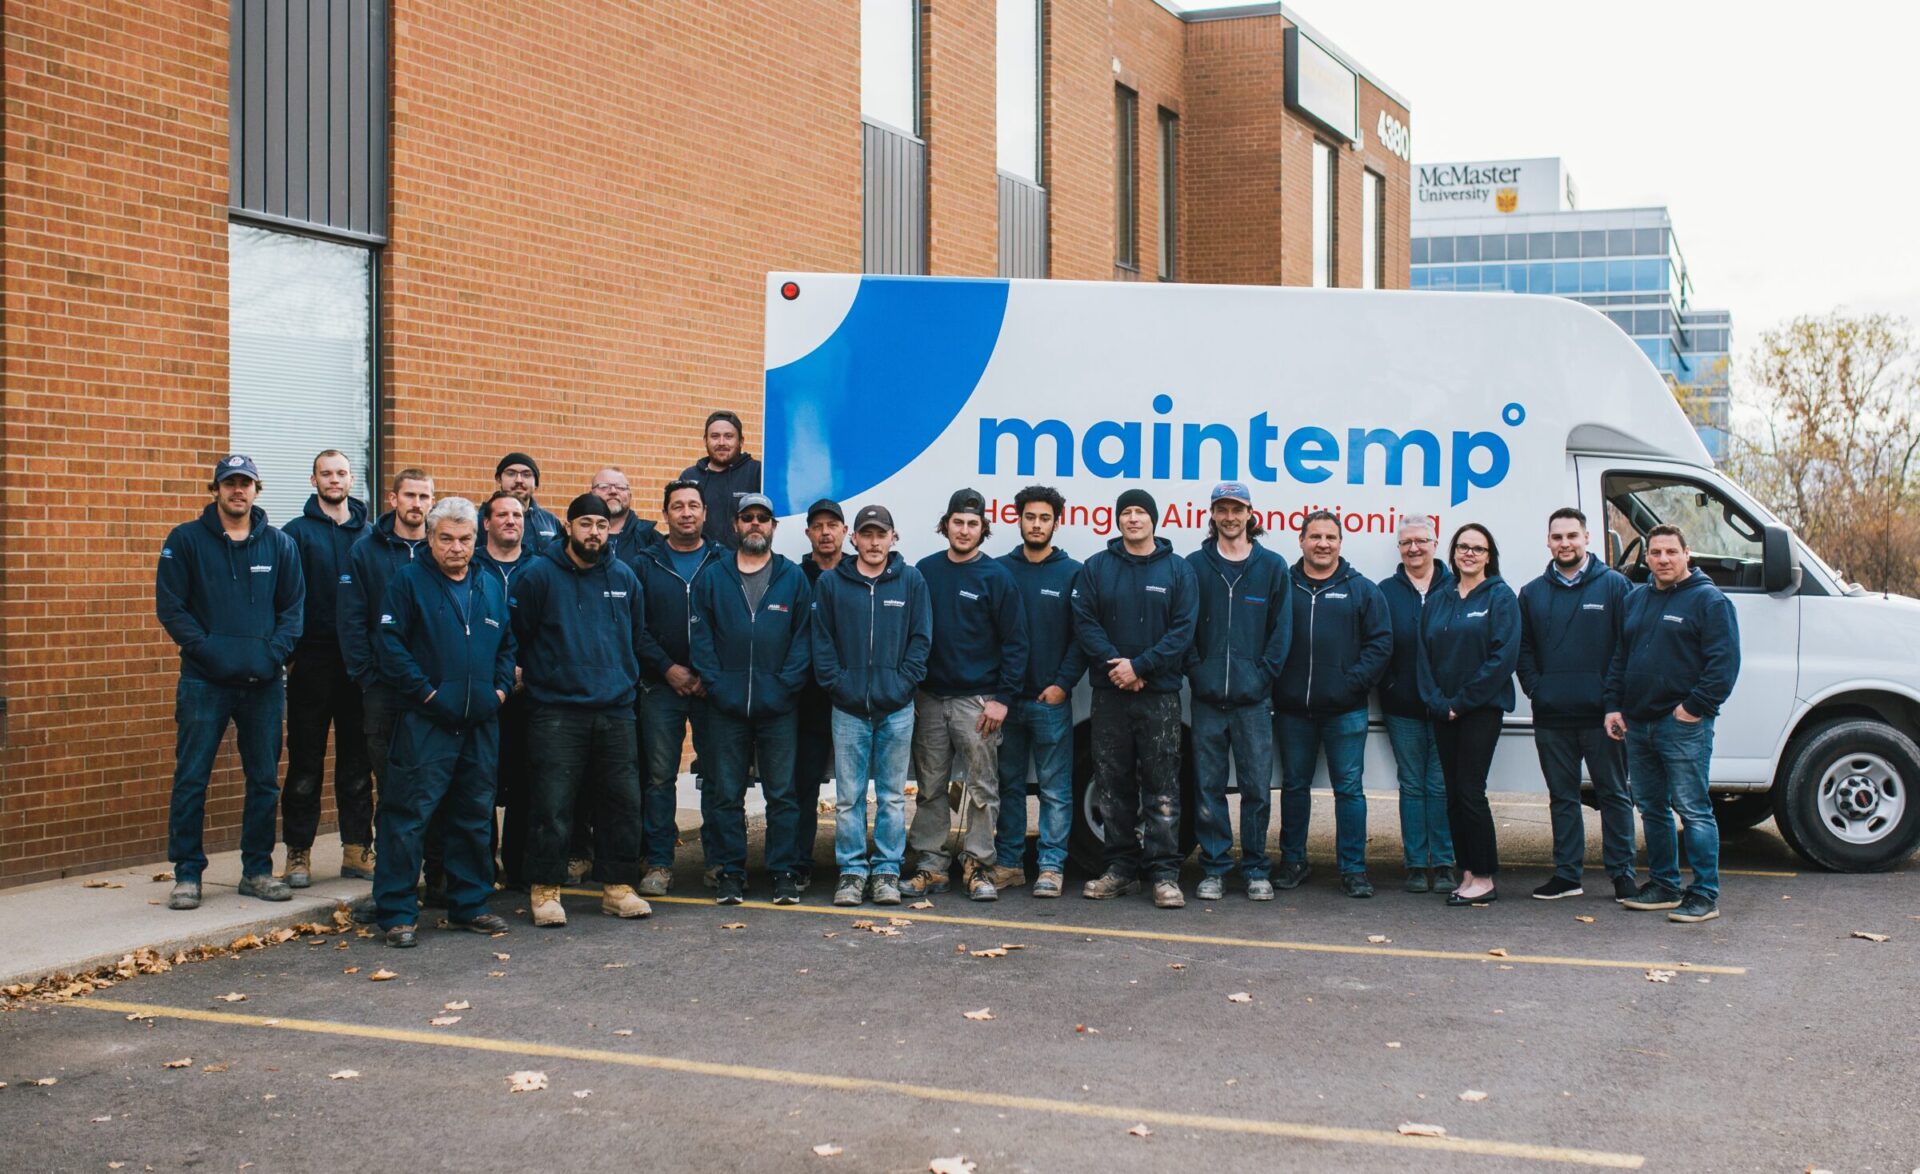 A group of twenty-two people in uniform stand in front of a commercial van with the "Maintemp" logo outside a building with the McMaster University sign.